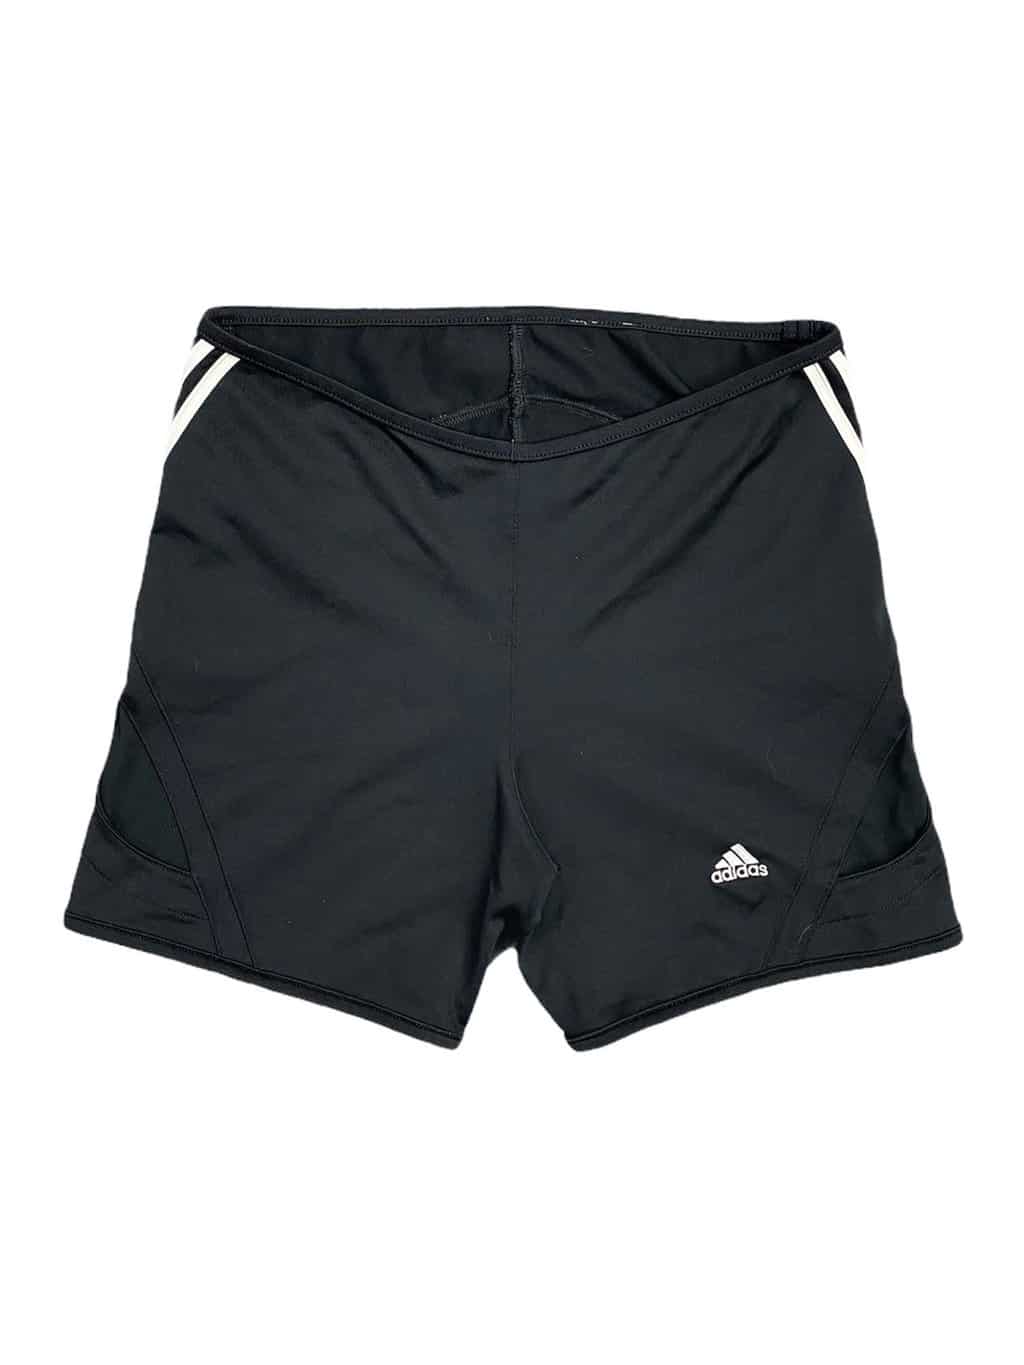 https://www.stcyrvintage.co.uk/wp-content/uploads/2021/05/womens-adidas-booty-shorts-in-black-with-white-three-stripes-sporty-sportswear-hot-pants-lycra-womens-size-xs-s-60ac1709.jpg